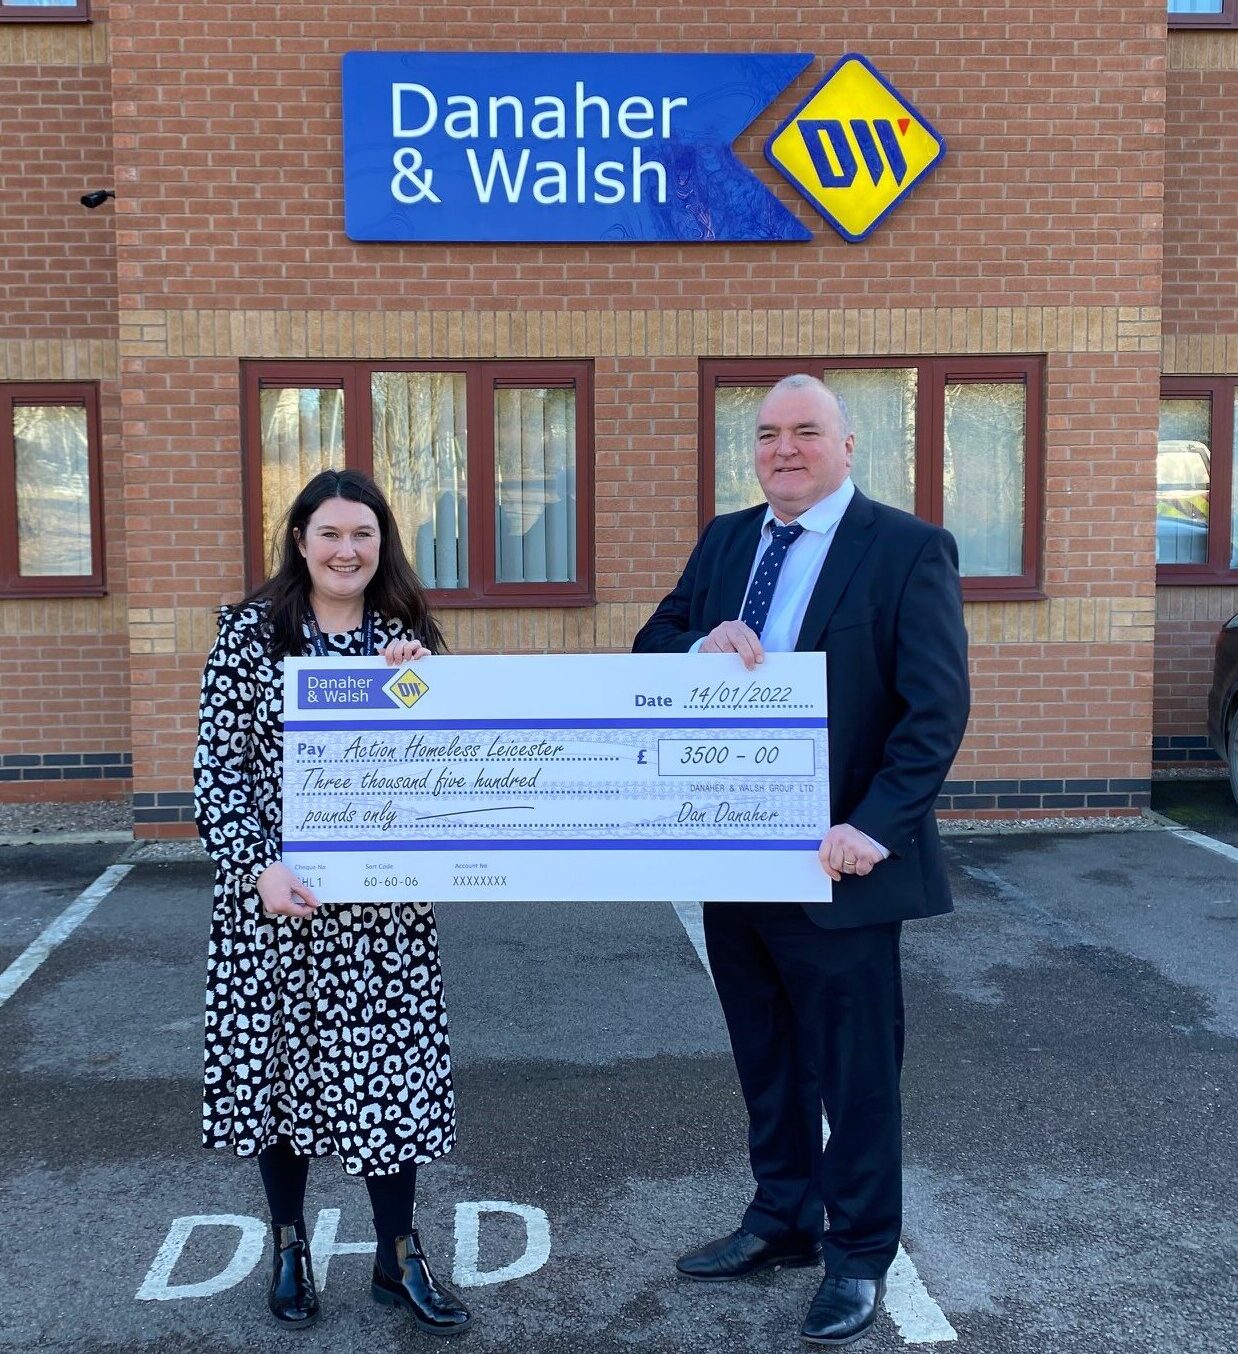 Danaher and Walsh with a donation cheque of £3,500